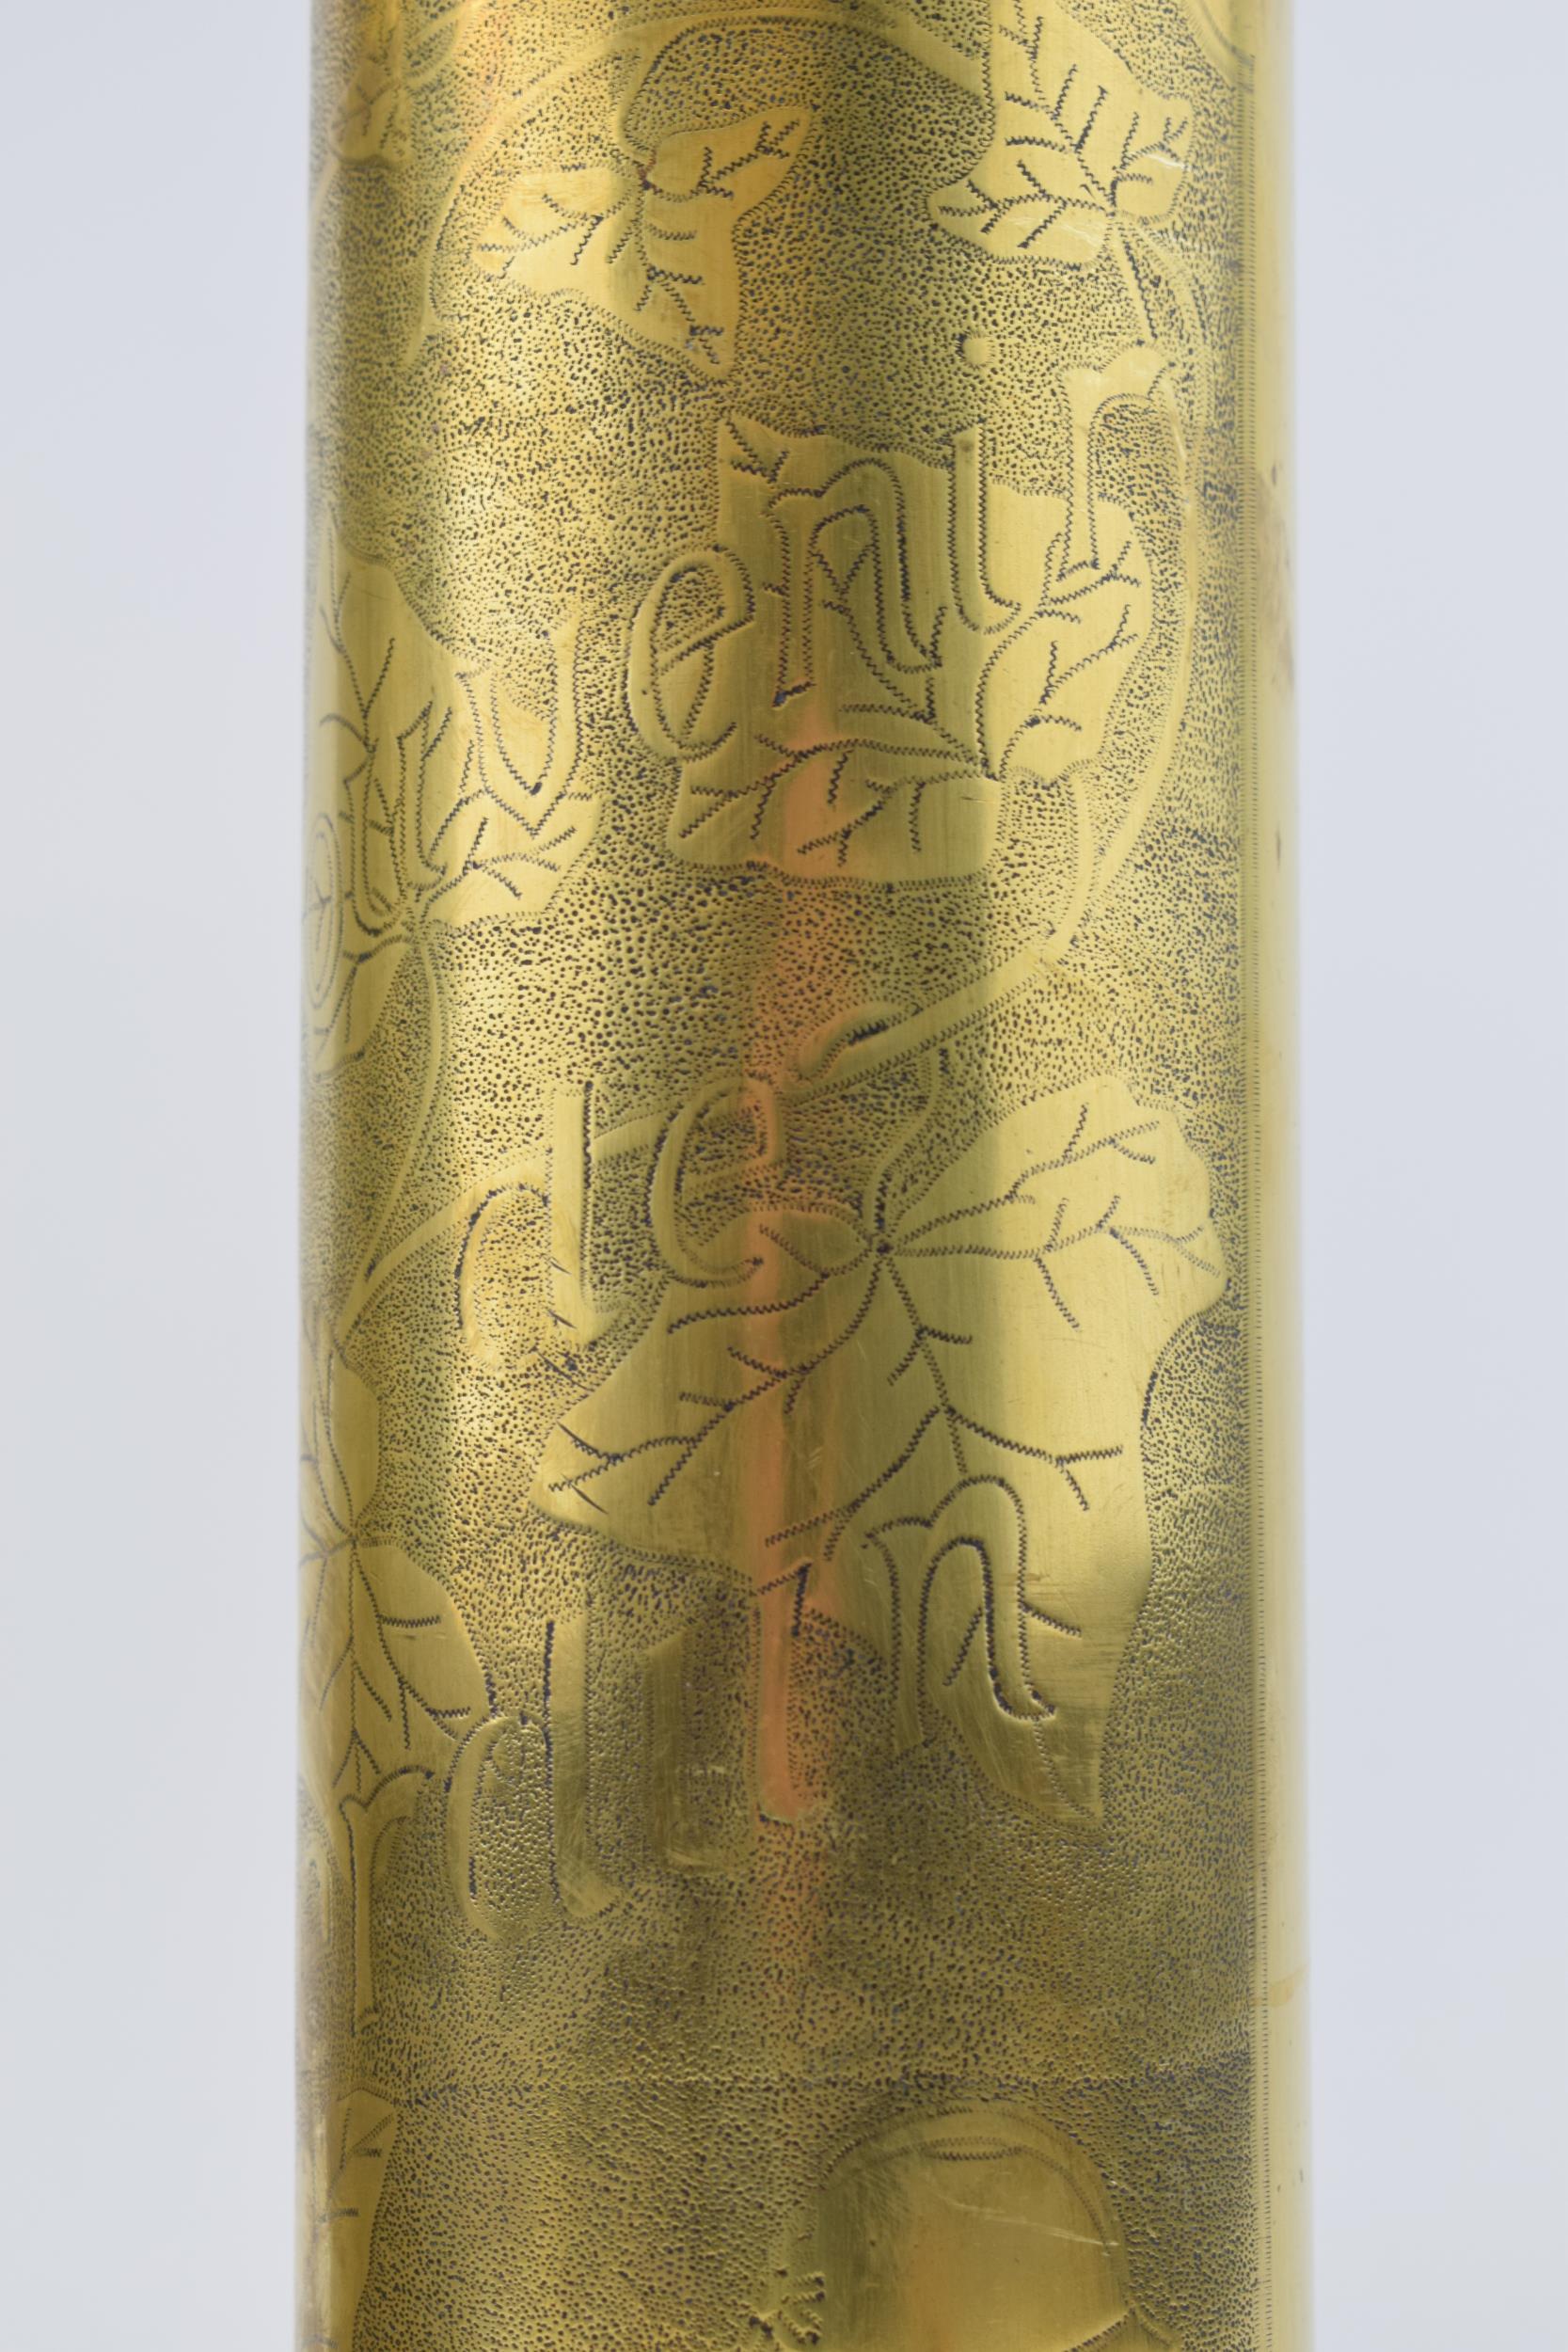 A pair of Trench Art vases, 29cm tall, engraved decoration ‘Souvenir de Verdun’, one being 1915 - Image 2 of 6